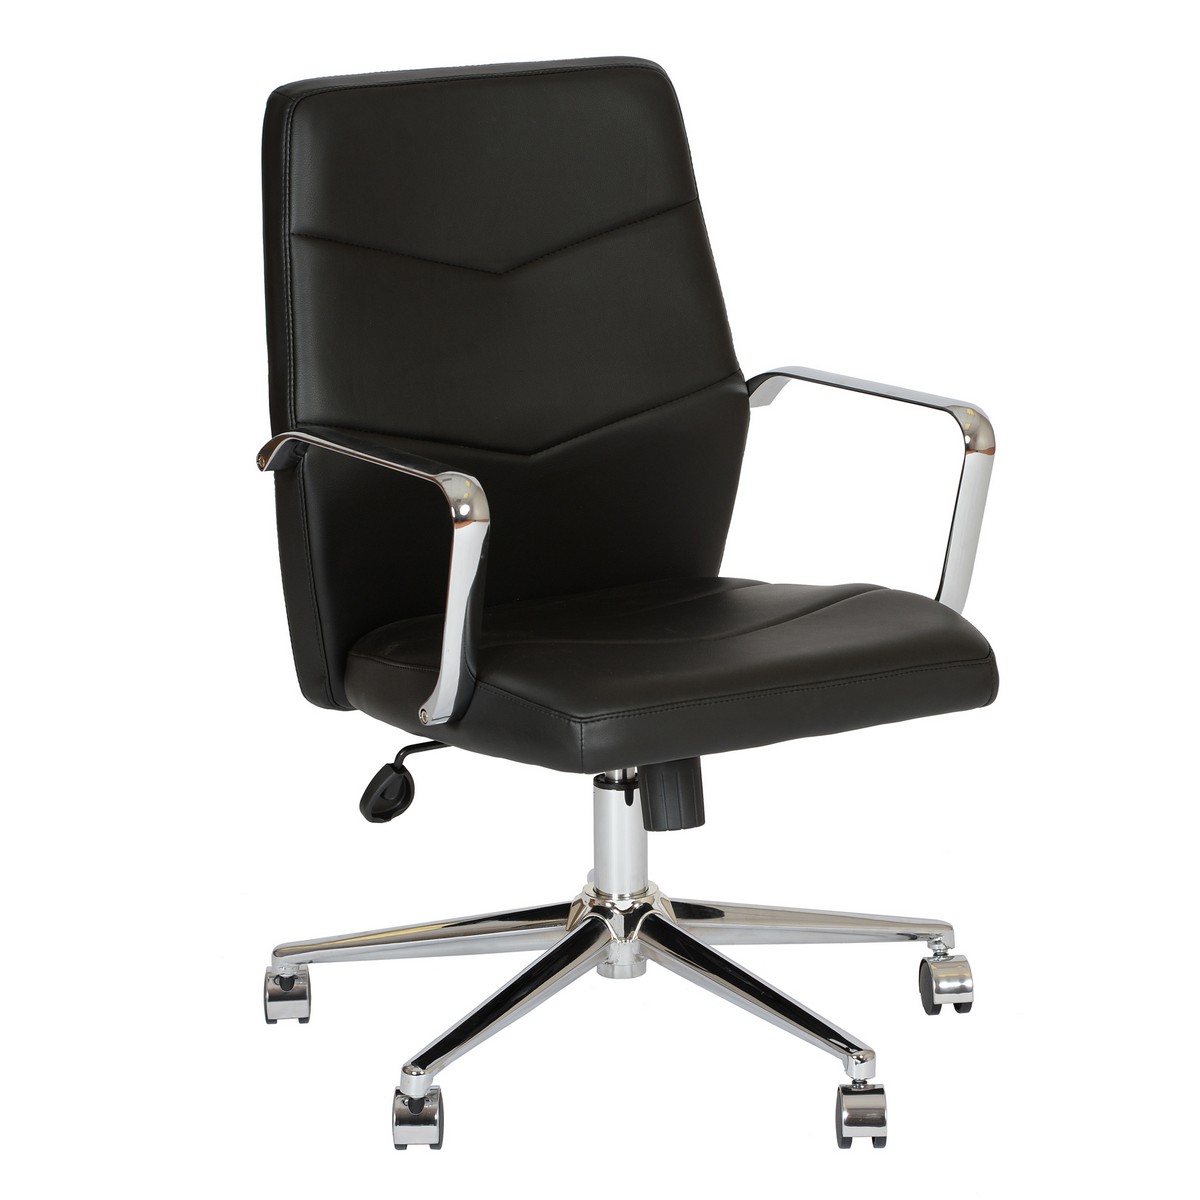 Armen Living Viken Contemporary Office Chair In Black and Chrome